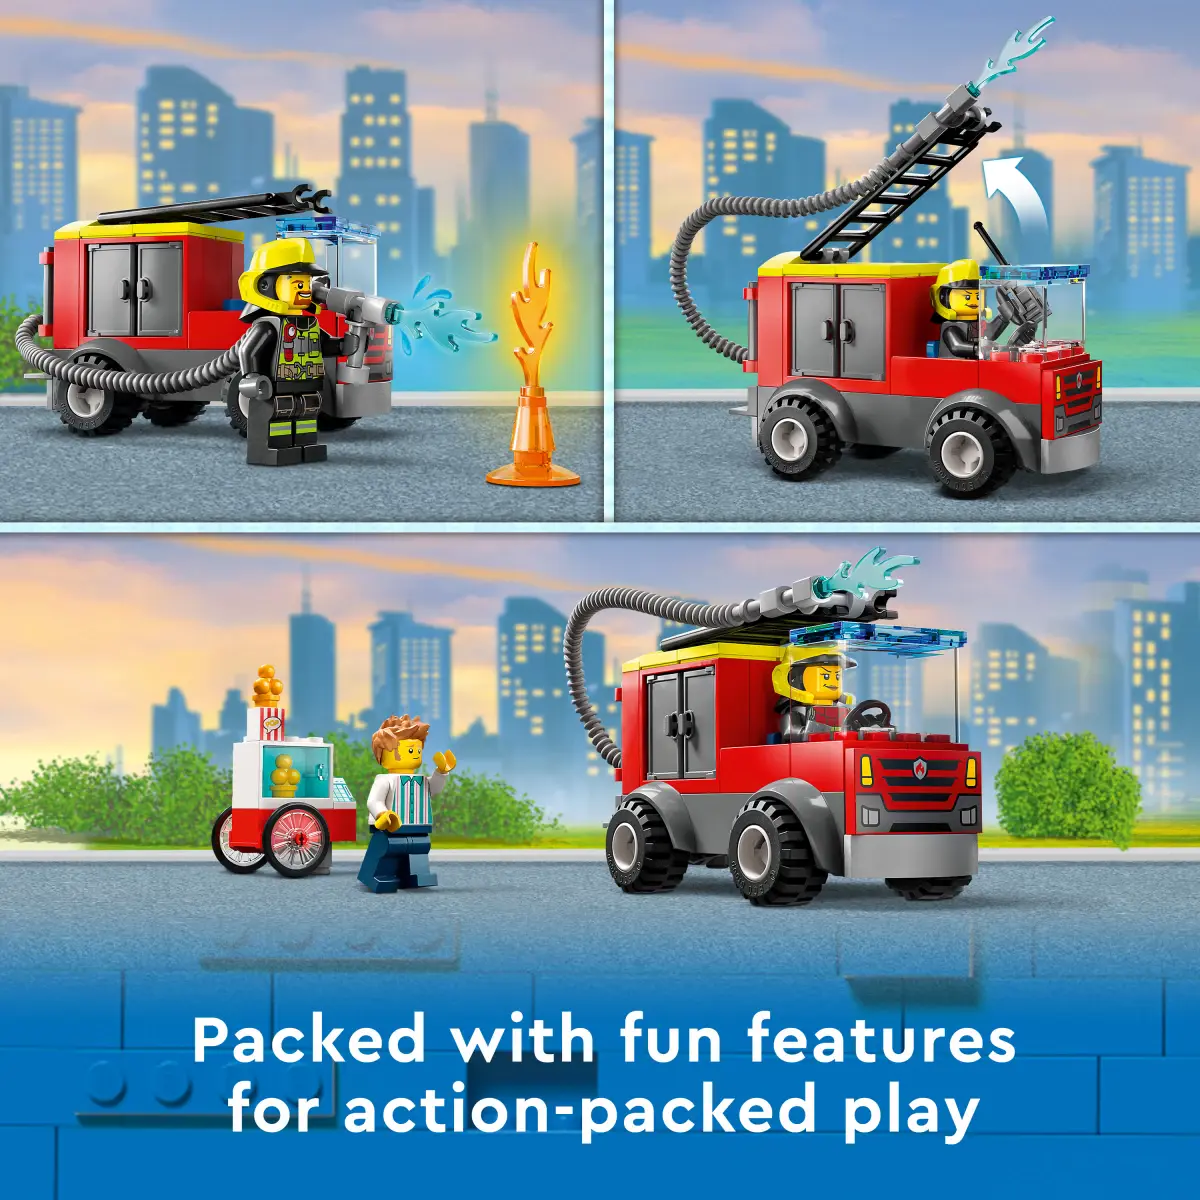 LEGO City Fire Station and Fire Engine Building Toy Set, 153 Pieces, Multicolour, 4Y+